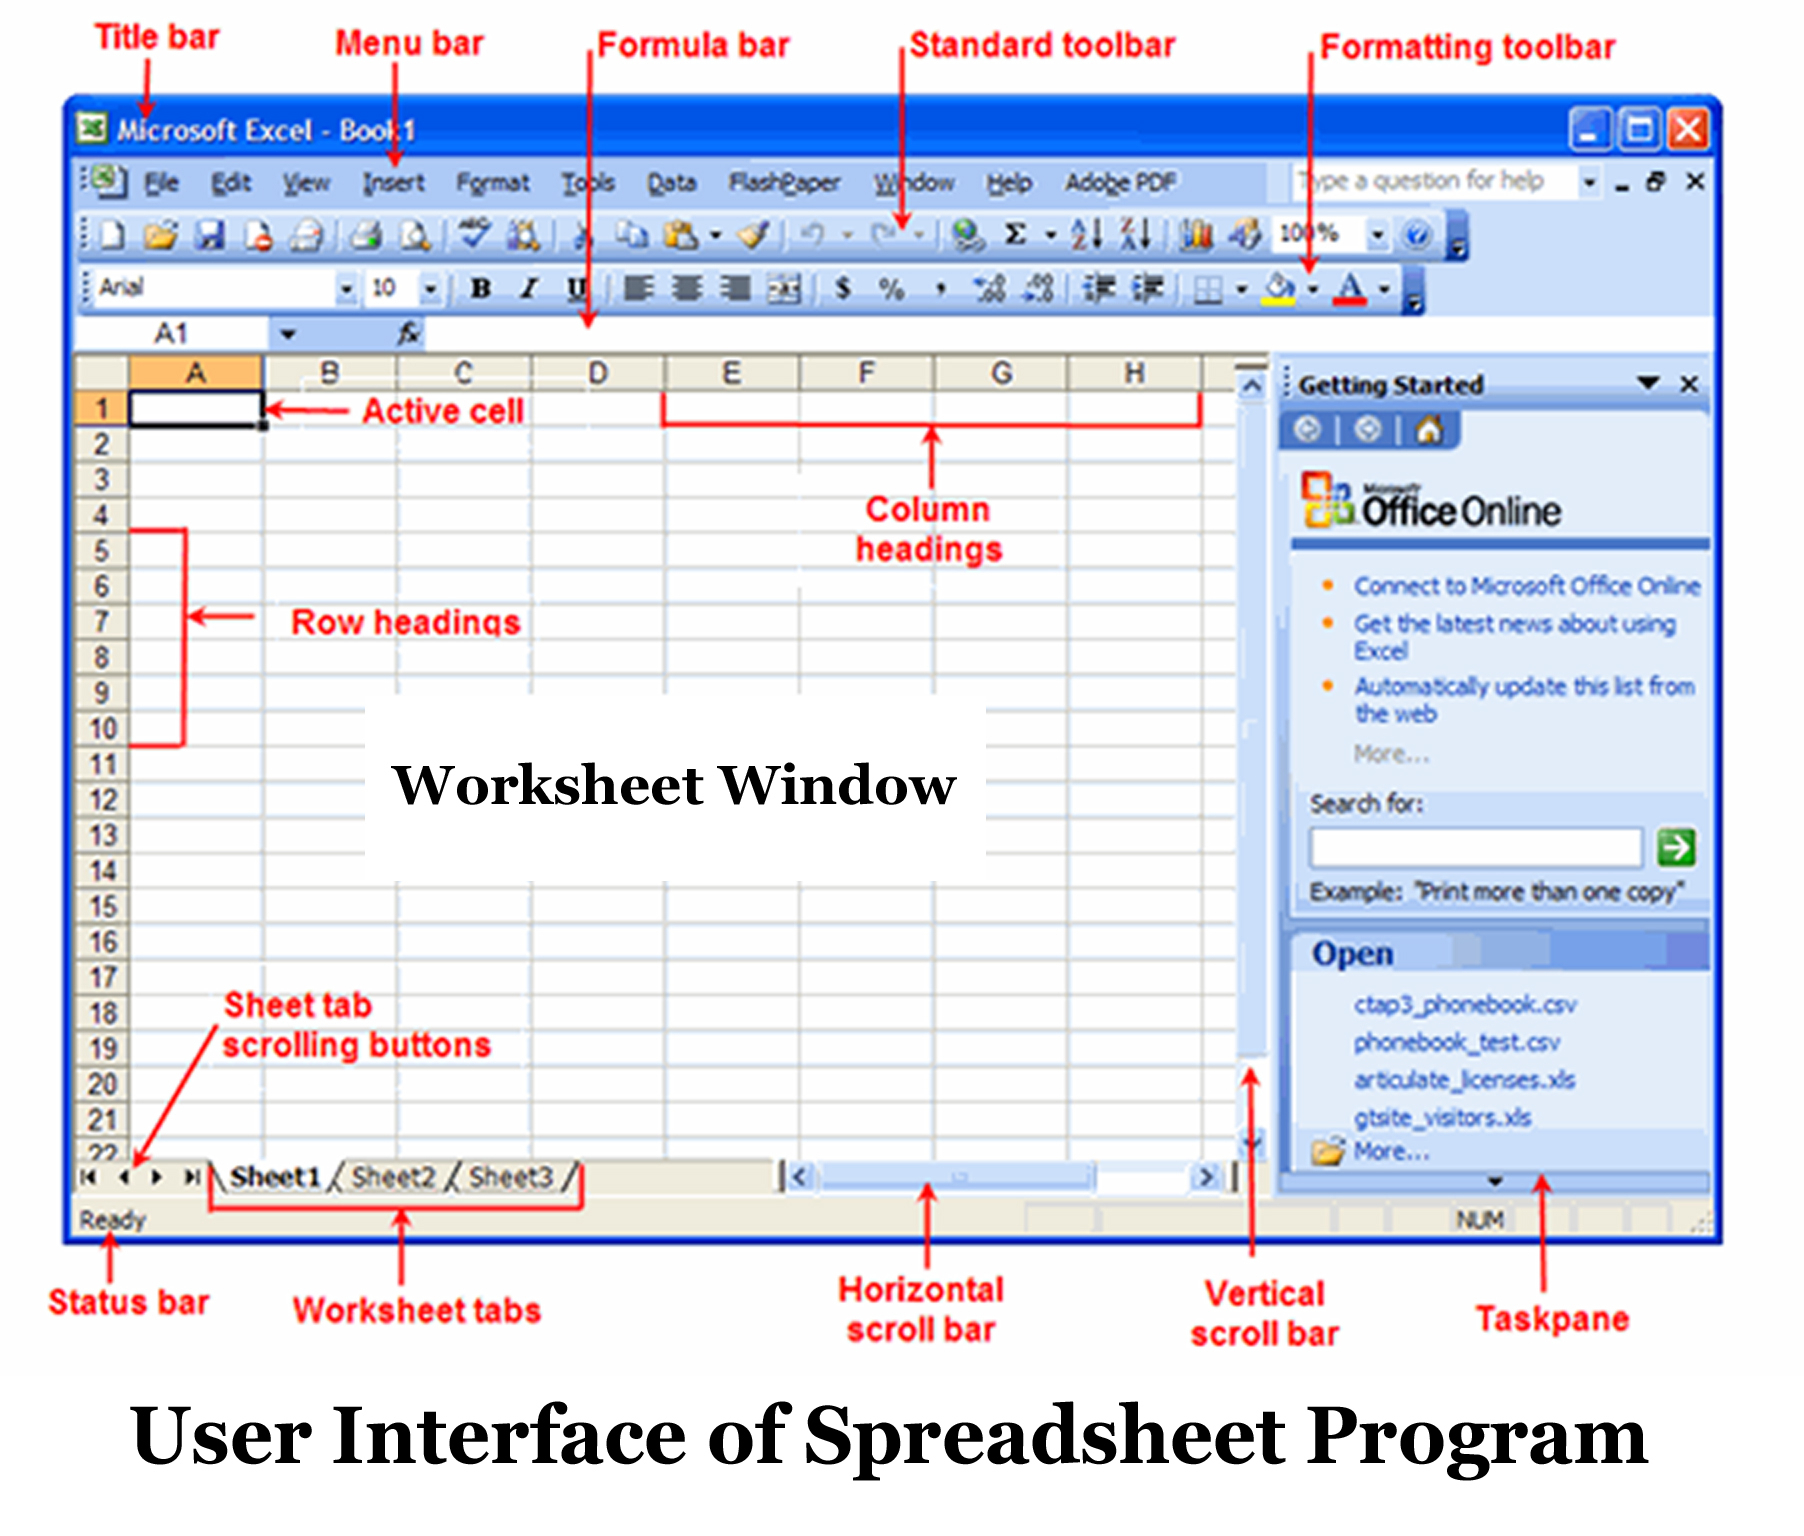 Features Of Spreadsheet Program With Spreadsheet, Its Basic Features And User Interface